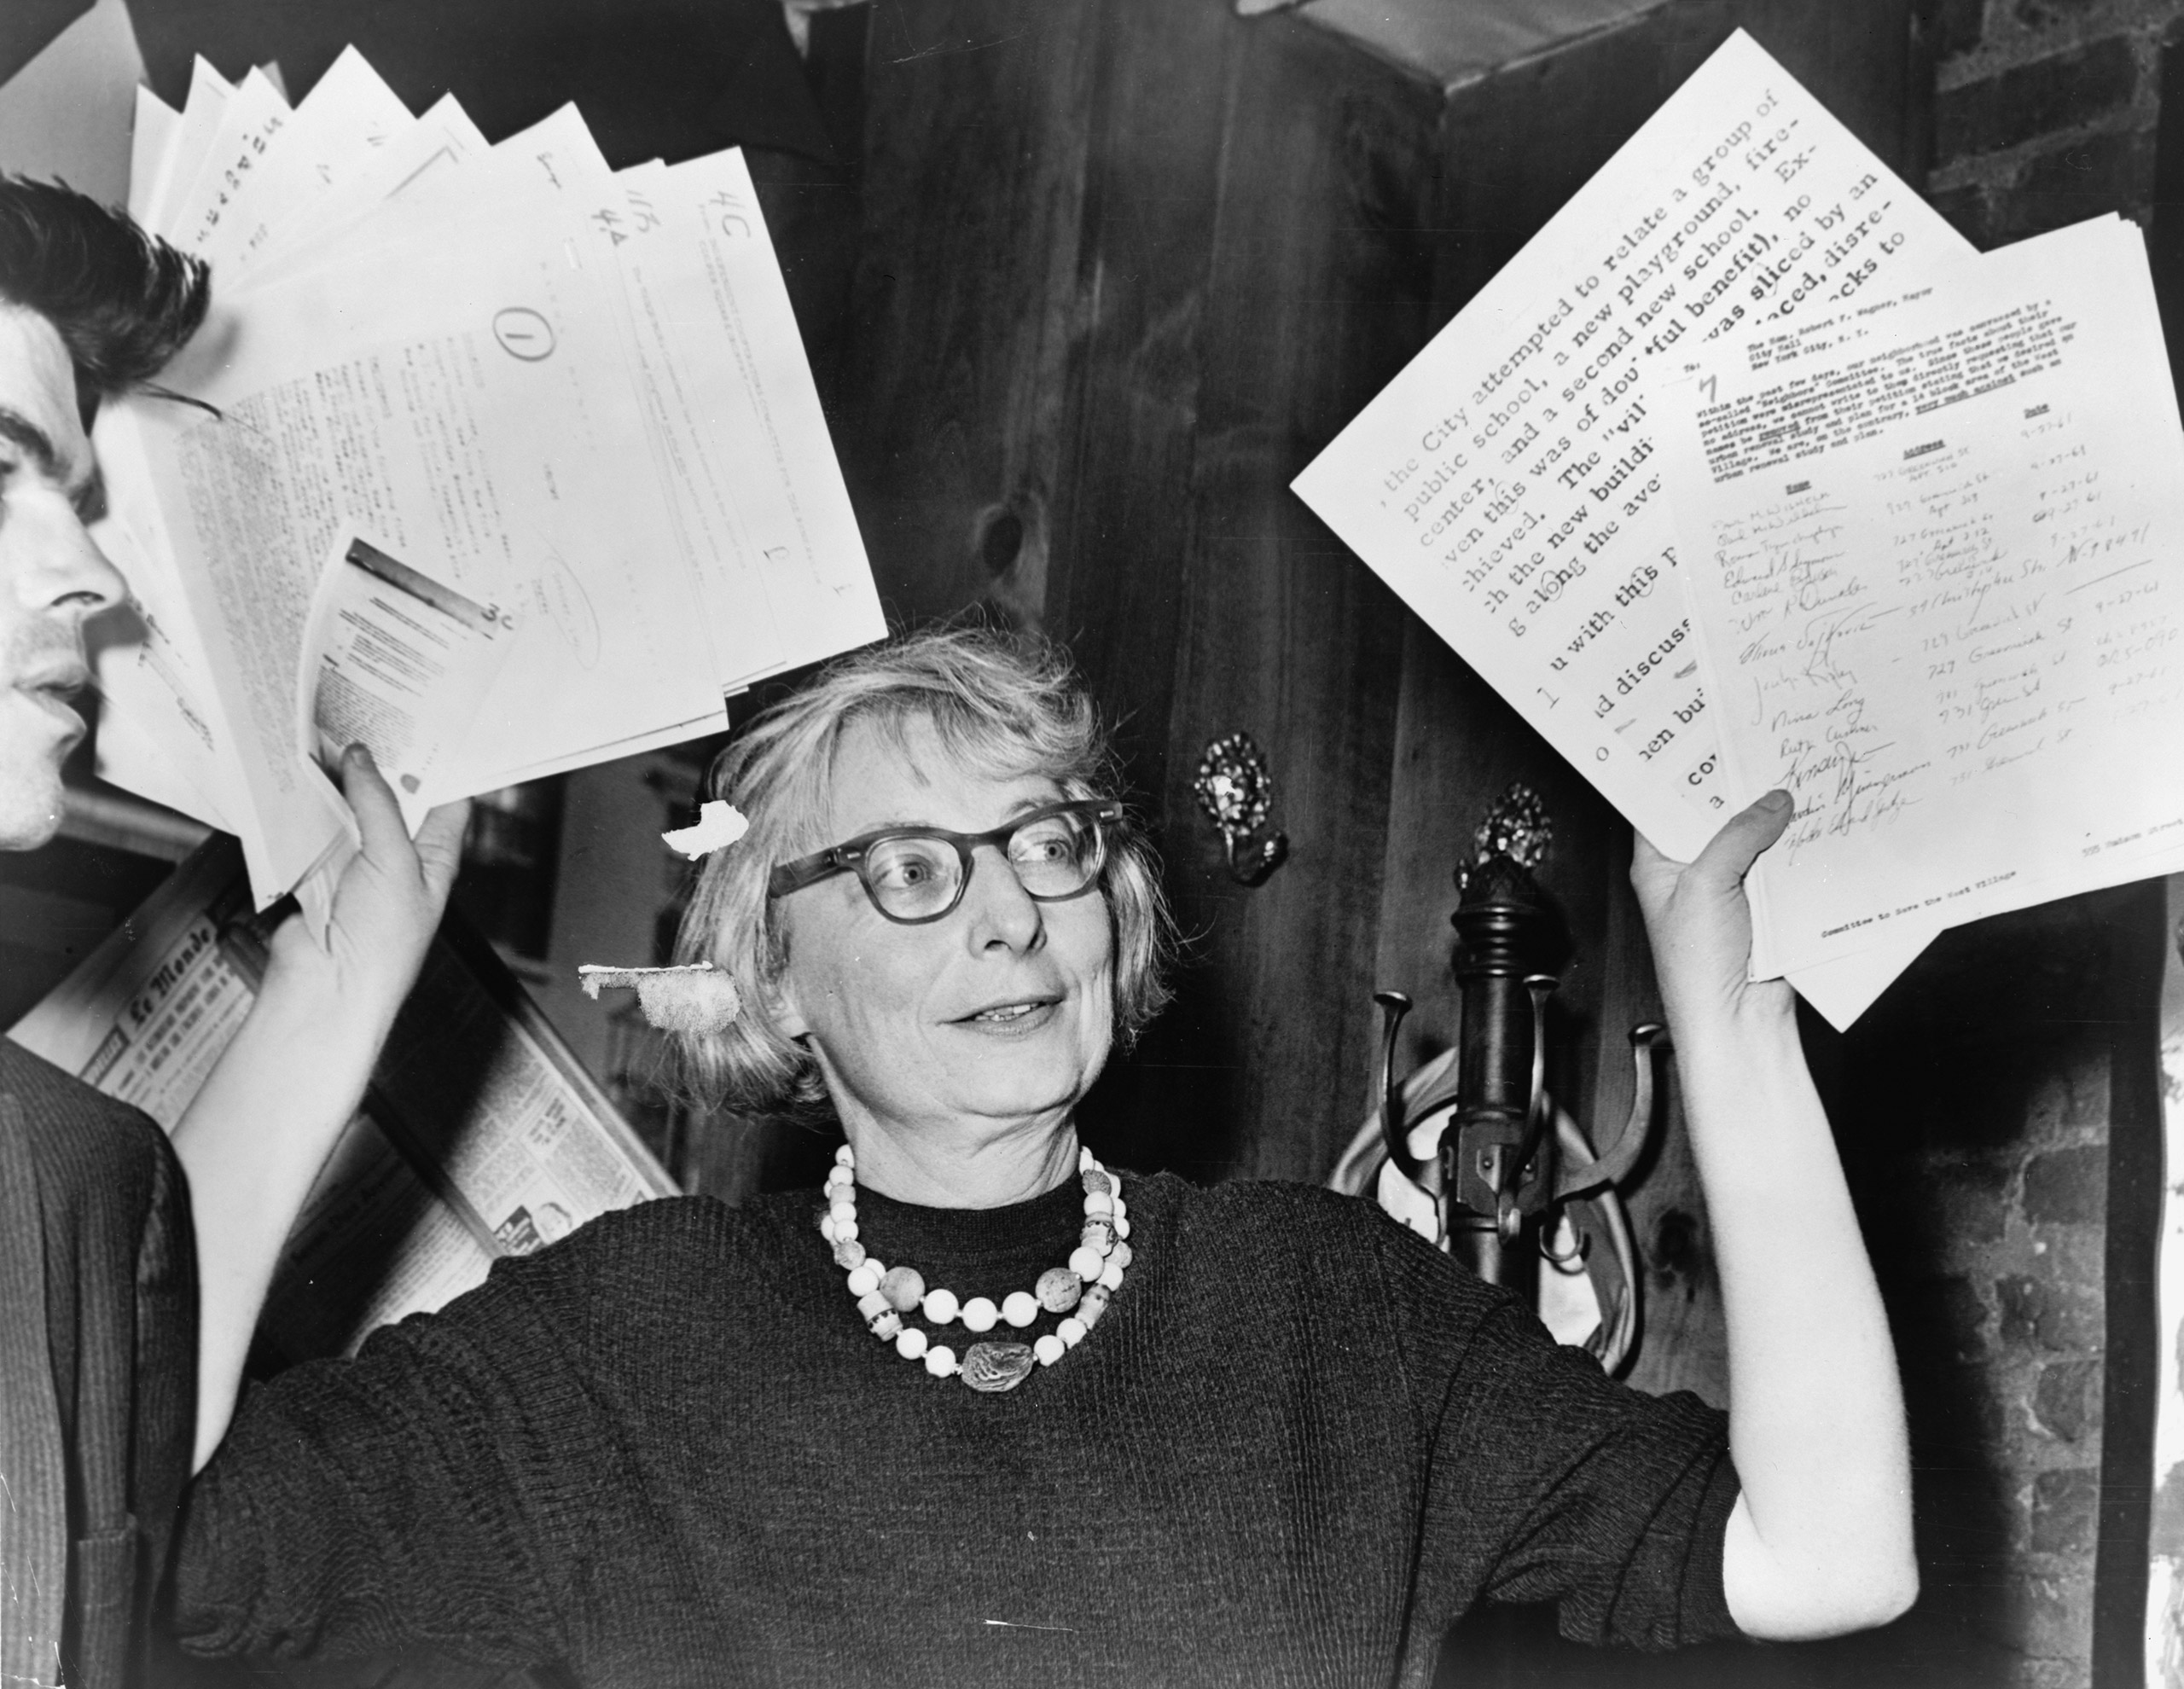 Mrs. Jane Jacobs, chairman of the Comm. to save the West Village holds up documentary evidence at press conference at Lions Head Restaurant at Hudson &amp; Charles Streets. World Telegram &amp; Sun photo by Phil Stanziola. (Library of Congress/courtesy of IFC Films)